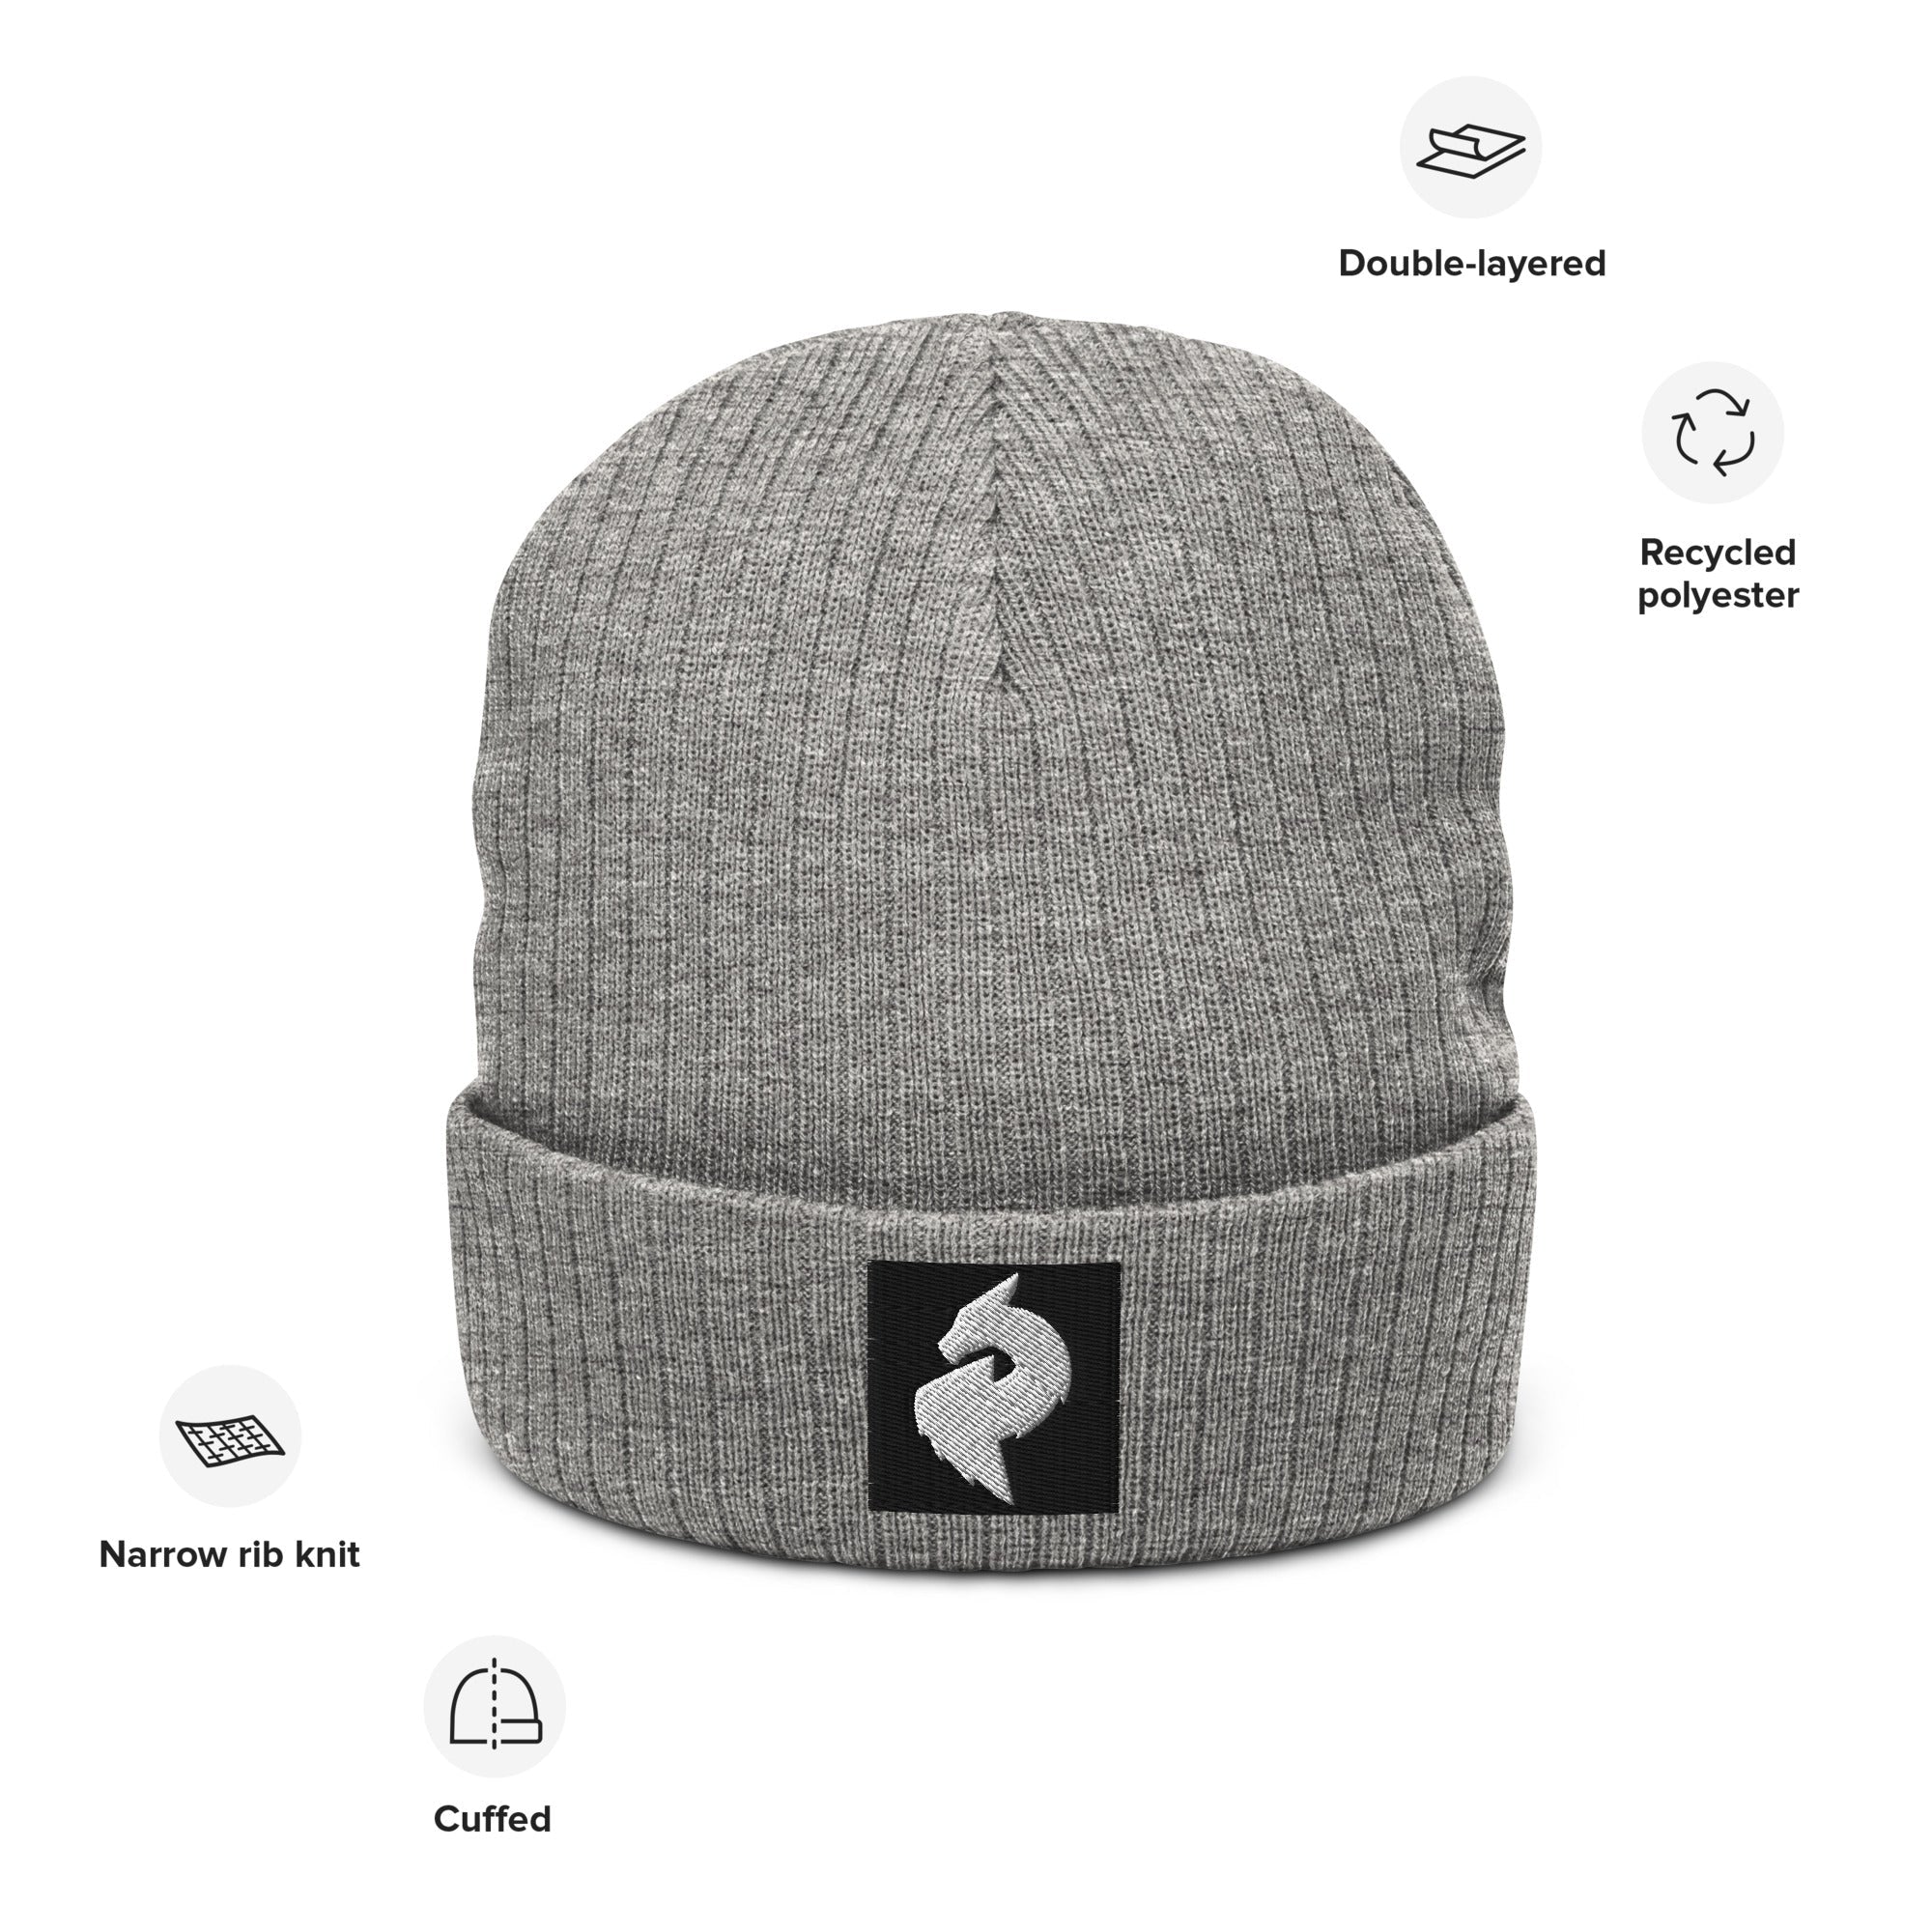 His or Hers Dragon Foxx™ Eco - Ribbed knit beanie - His or Hers Dragon Foxx™ Eco - Ribbed knit beanie - DRAGON FOXX™ - His or Hers Dragon Foxx™ Eco - Ribbed knit beanie - 2867494_13239 - Light Grey Melange - - Accessories - Acid Green Eco - Ribbed knit beanie - Beanie